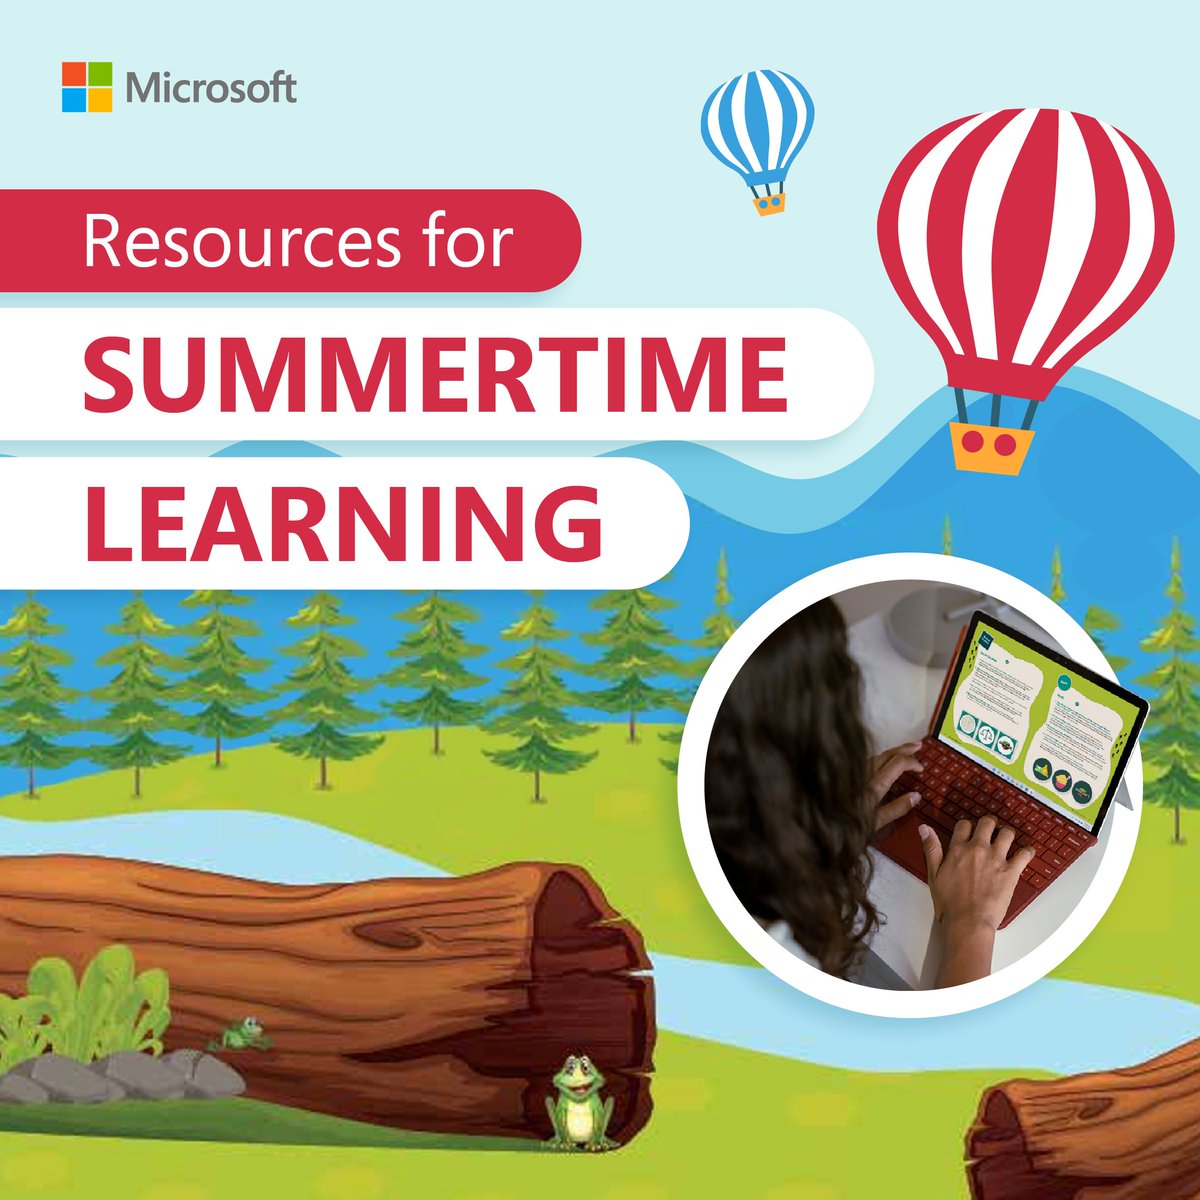 School might be over, but learning doesn’t have to end! 🧠 ☀️ 

Leaps and Logs is a free downloadable guide full of learning games and activities that can help keep students engaged all summer long. Check out the blog to join the fun: msft.it/6014g5lZy

#MicrosoftEDU